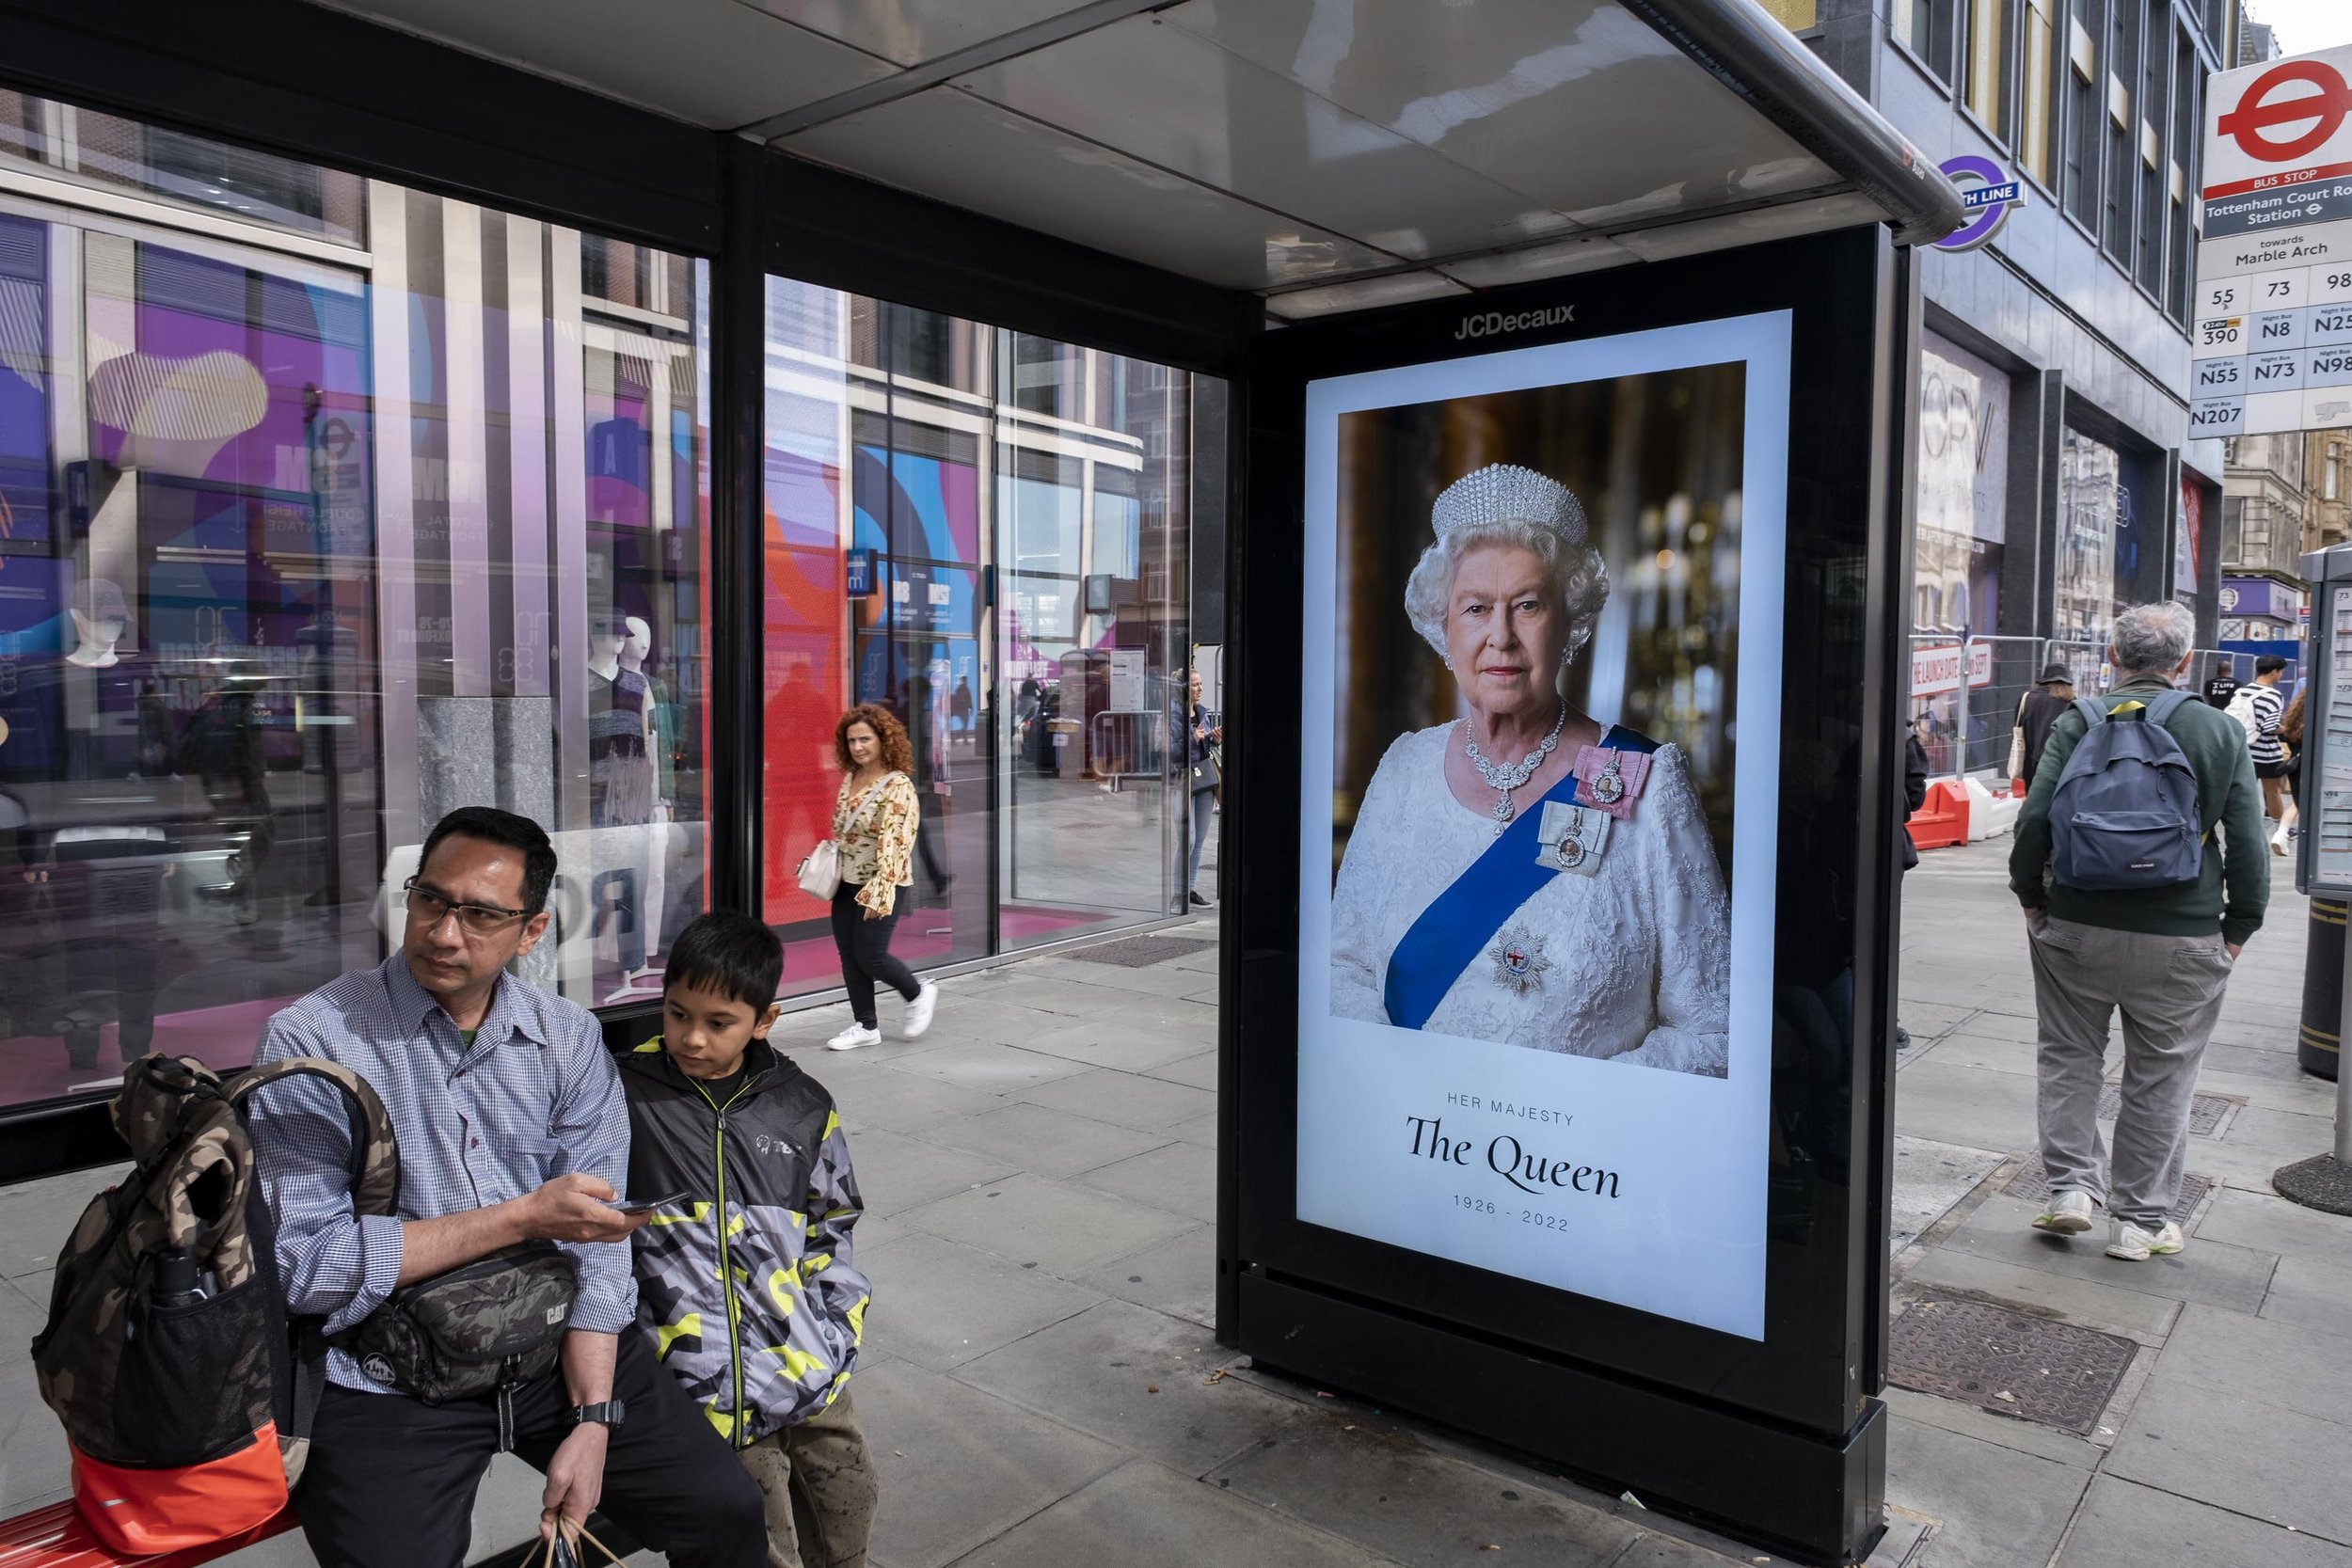  Advertising suspended, an image of the Queen is placed on bus stops. 